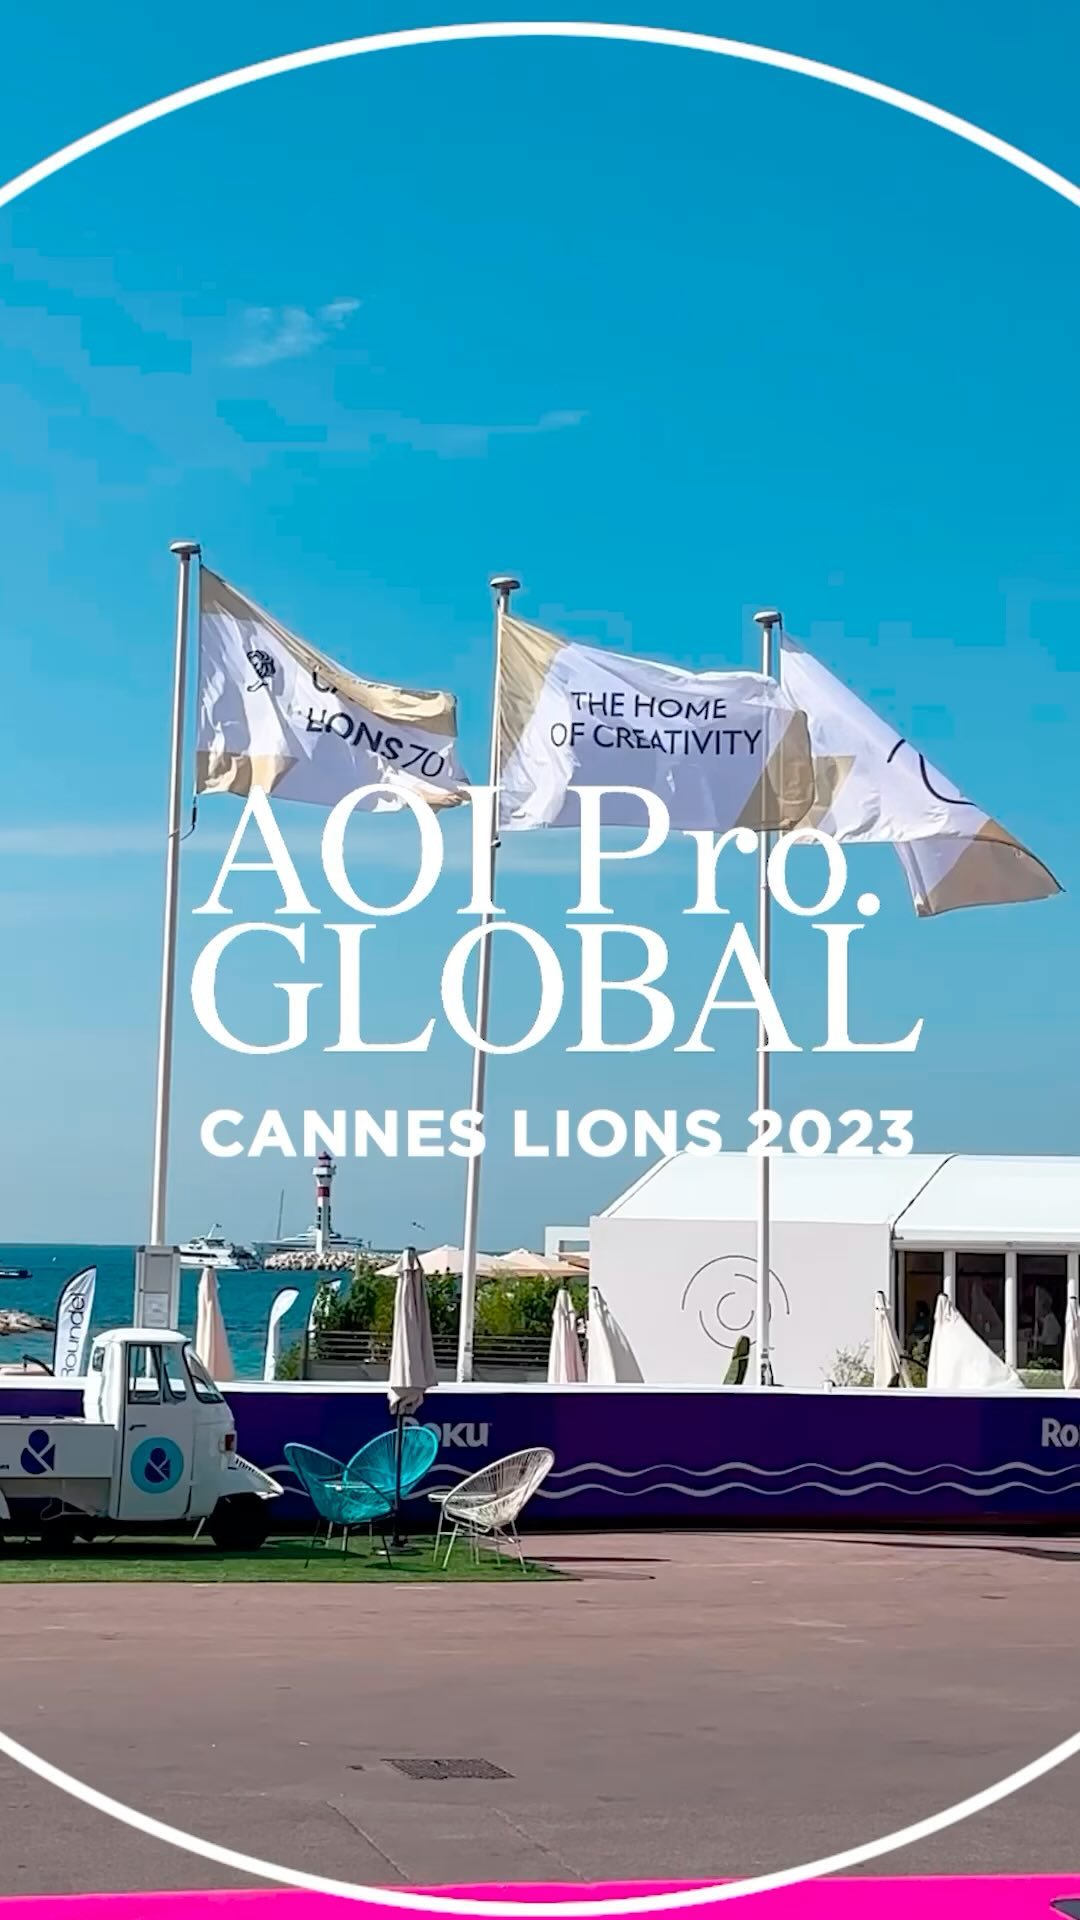 We conclude this year’s Cannes Lions by introducing up-and-coming members of the AOI Pro. team. They are driven and ambitious dreamers. 

We brought seven of our most promising young members to Cannes Lions because we firmly believe in their potential and are passionate about realizing dreams.

Our heartfelt gratitude to everyone who took the time to meet with our team.

As AOl celebrates 60 years of bringing ideas to life, we look forward to welcoming you all in Tokyo!

@cannes_lions @aoipro